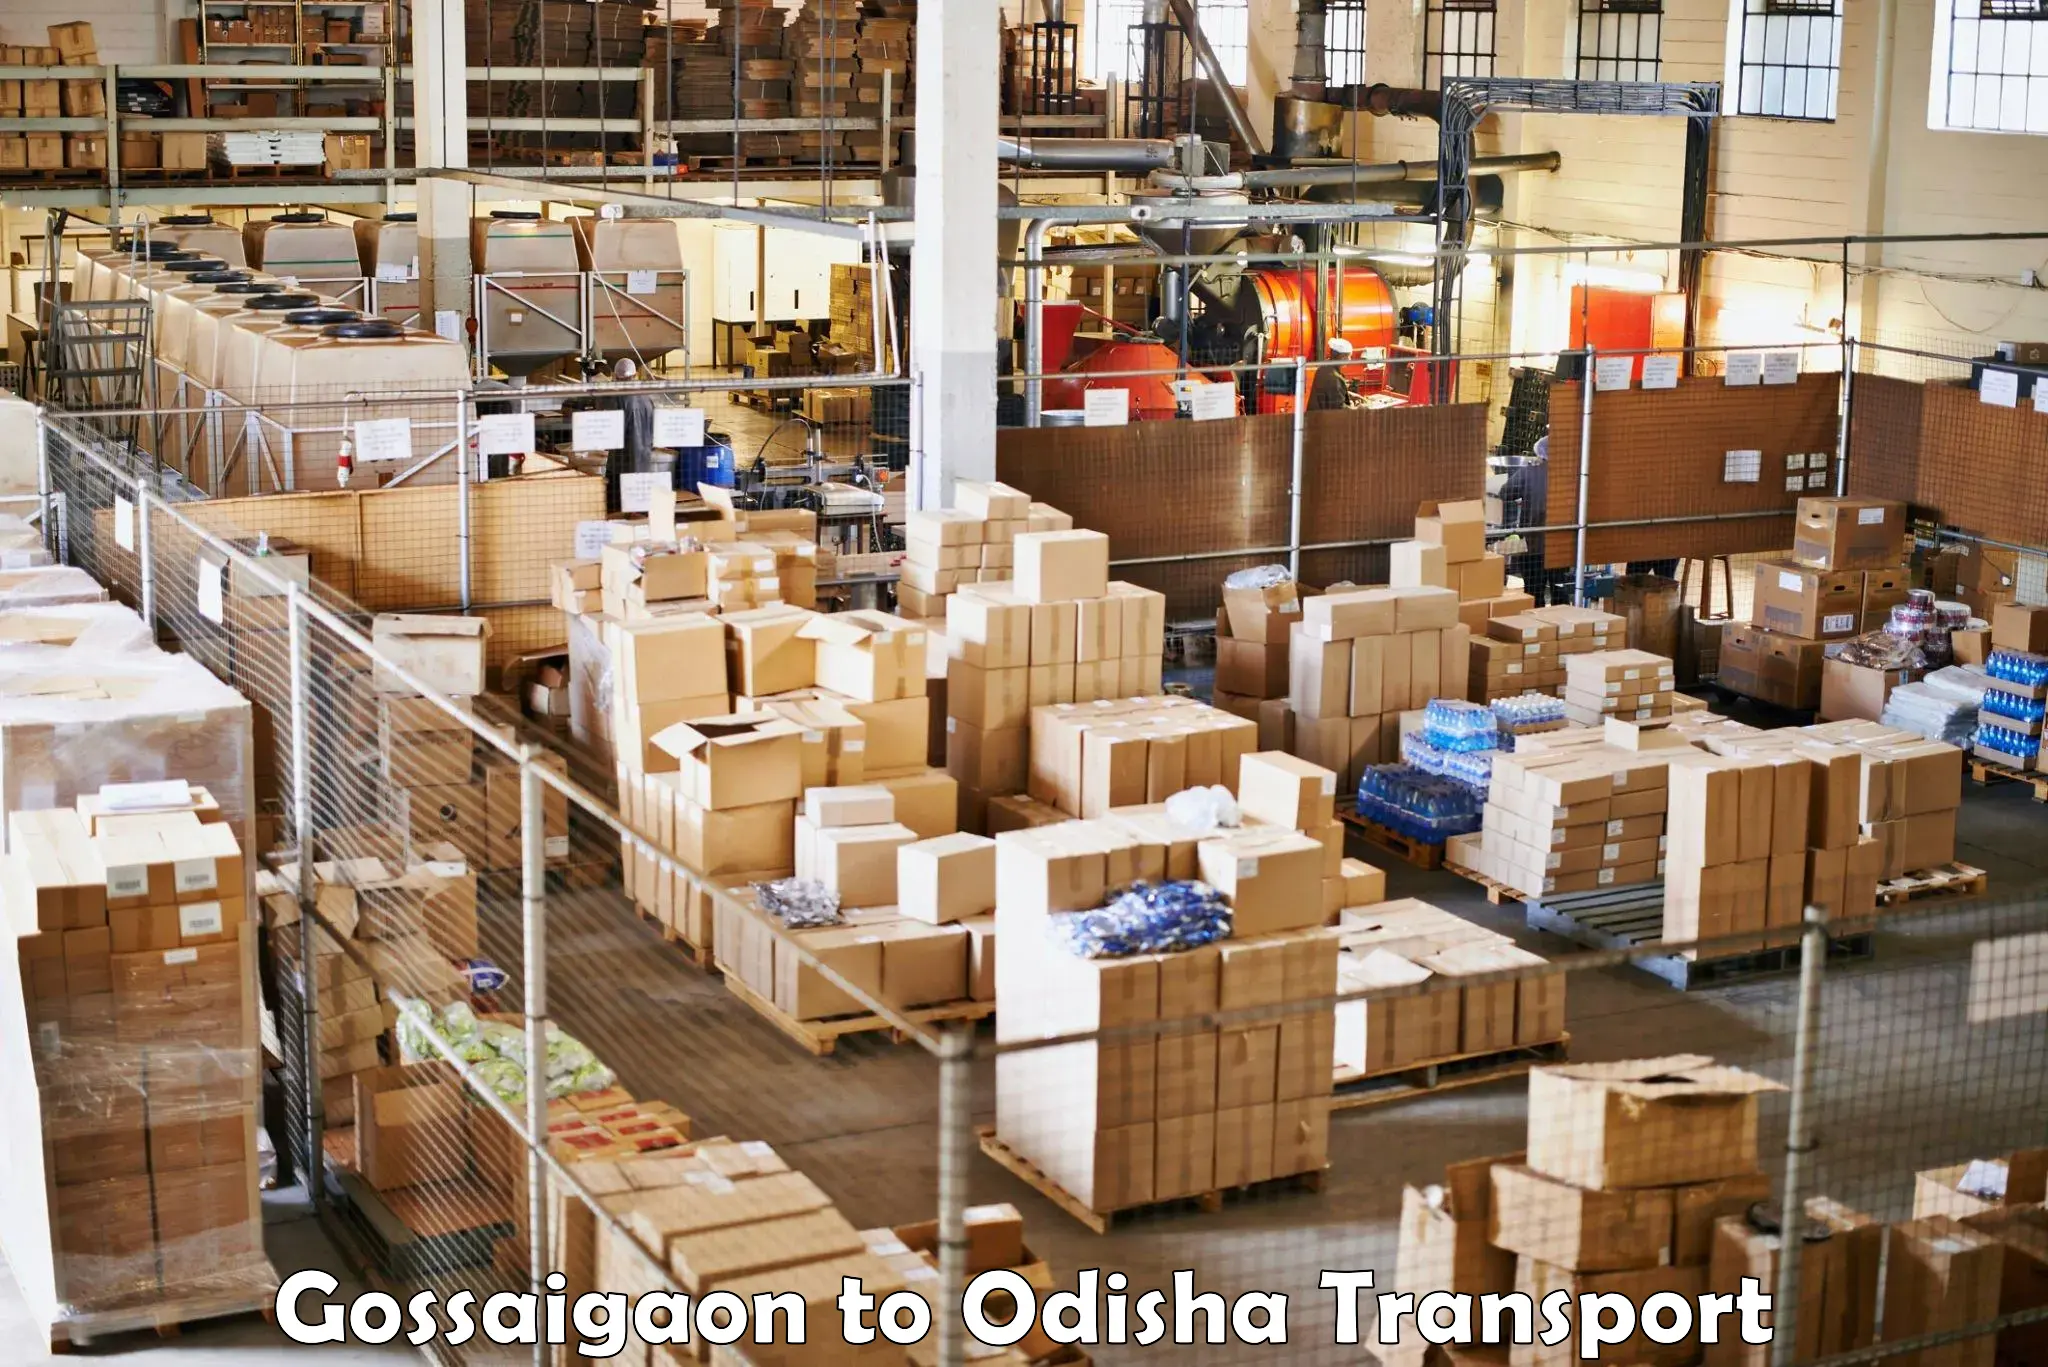 Part load transport service in India Gossaigaon to Odisha